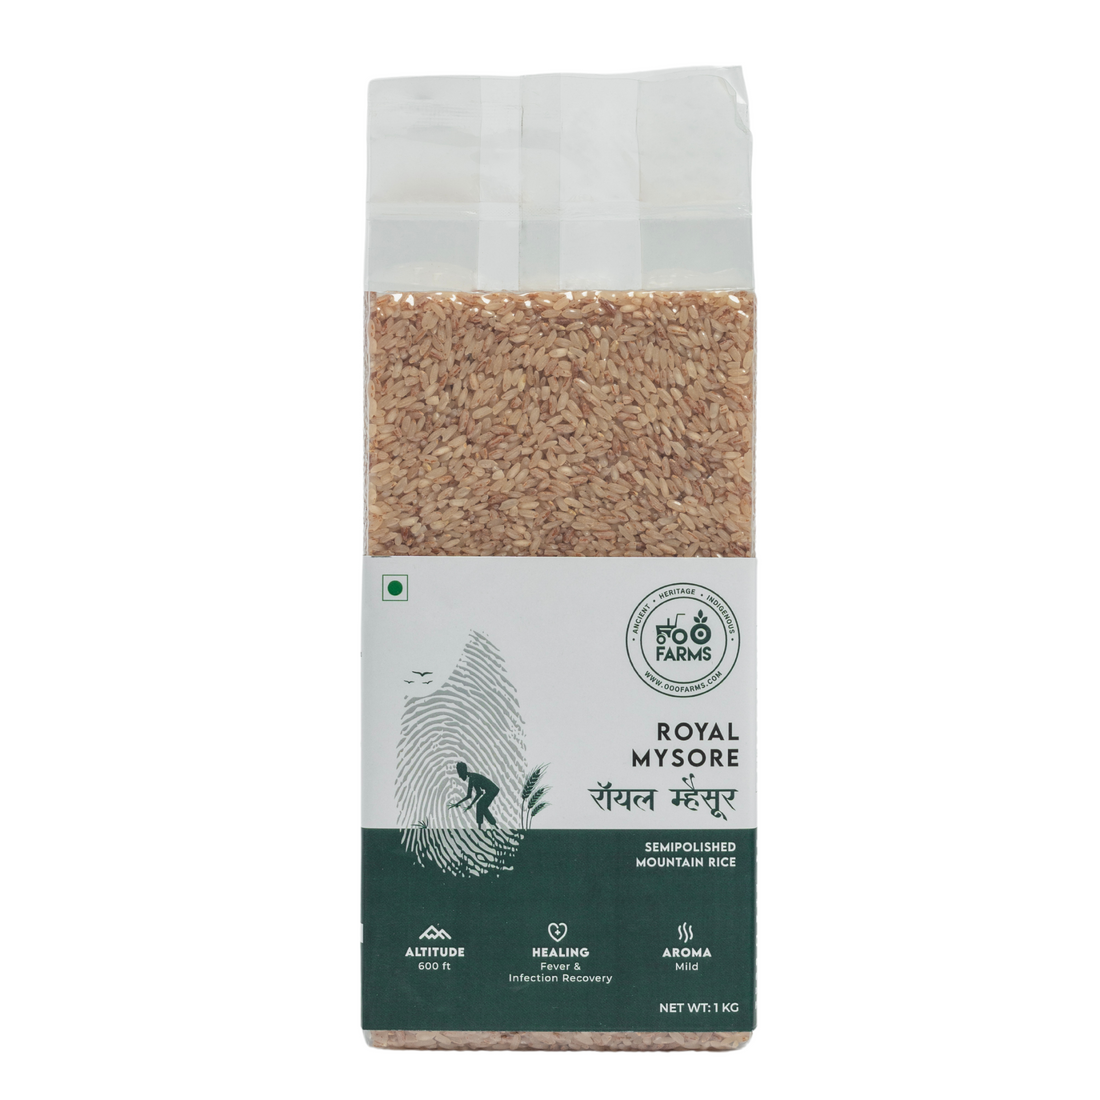 OOO Farms Royal Mysore Rice (Semipolished) Package Frontside